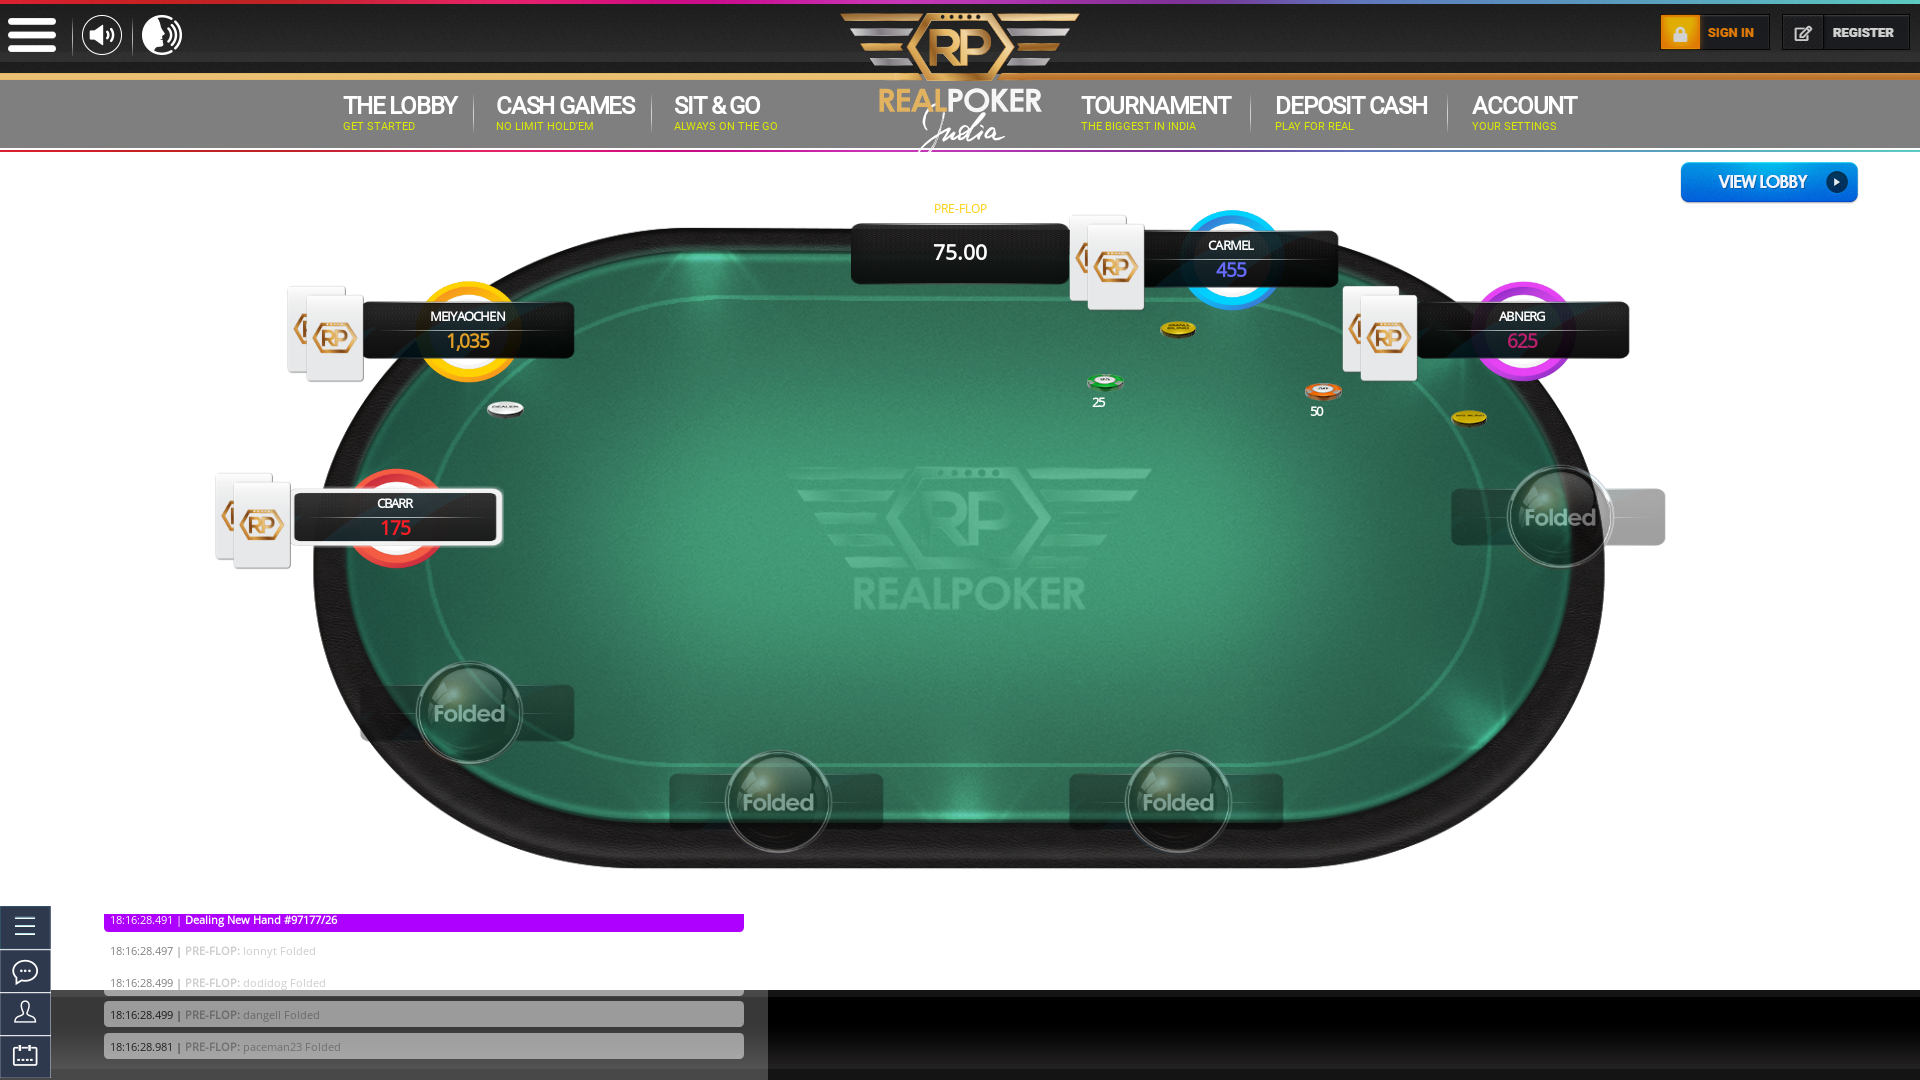 Real Indian poker on a 10 player table in the 15th minute of the game